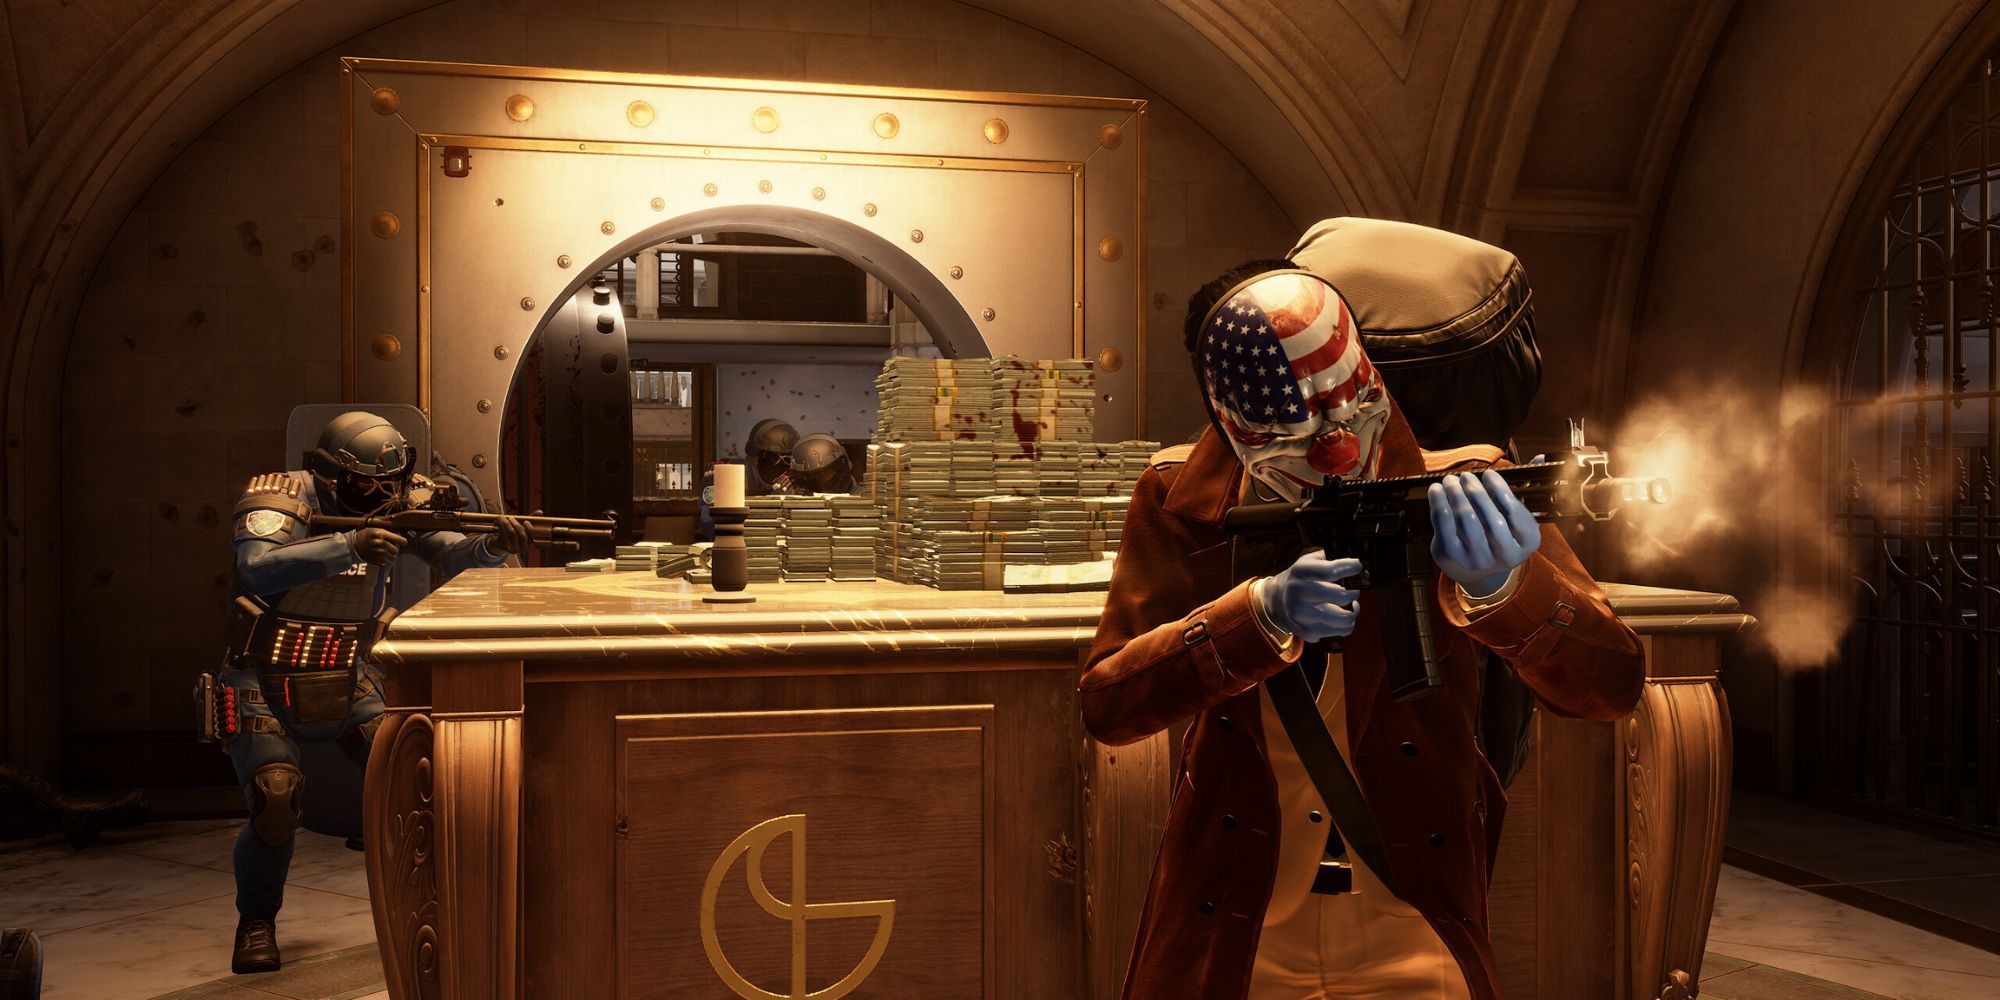 Hoxton protecting some bank money in Payday 3.